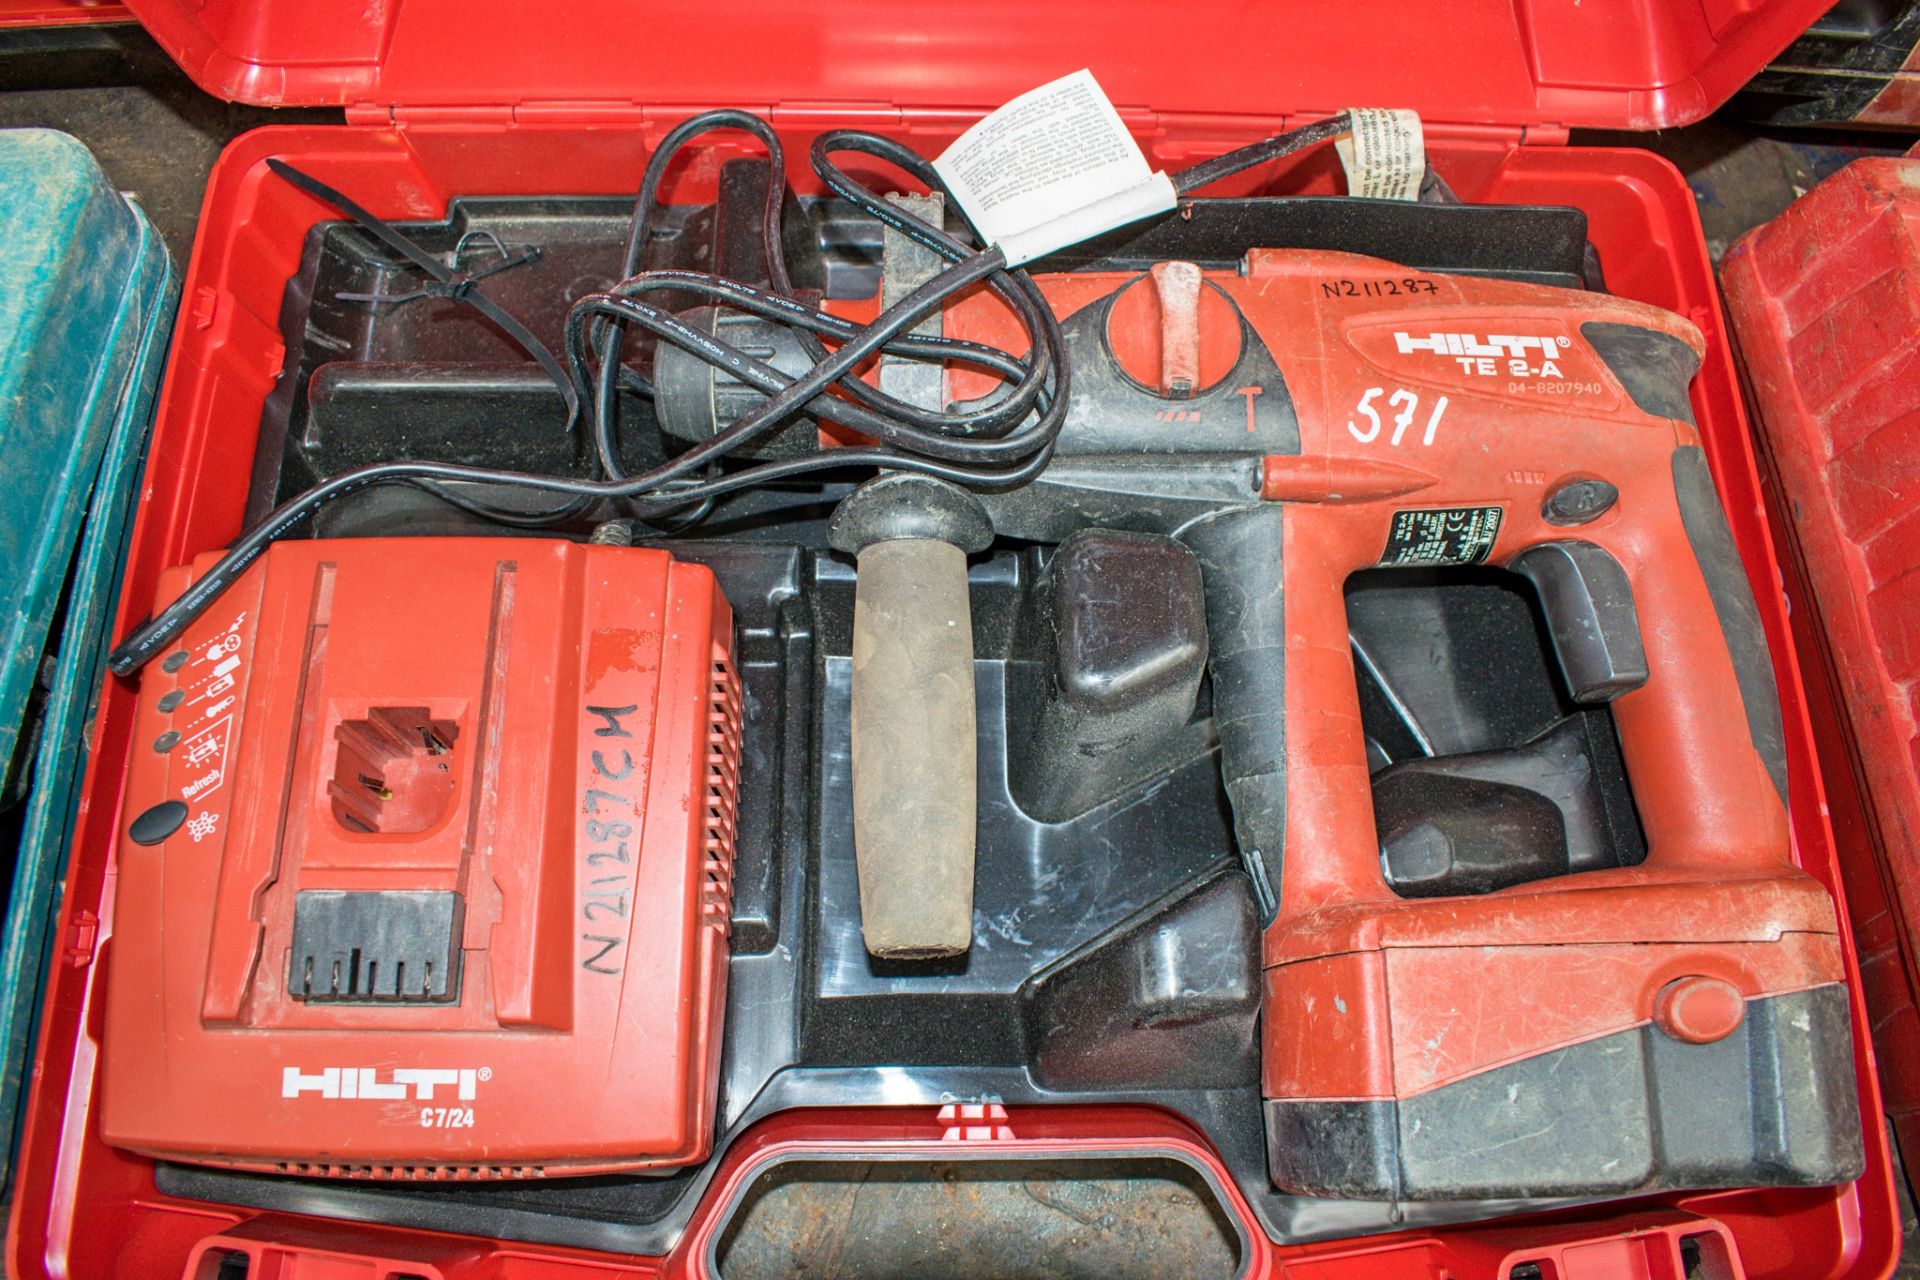 Hilti TE2-A 24v cordless SDS rotary hammer drill c/w charger, battery & carry case N211287